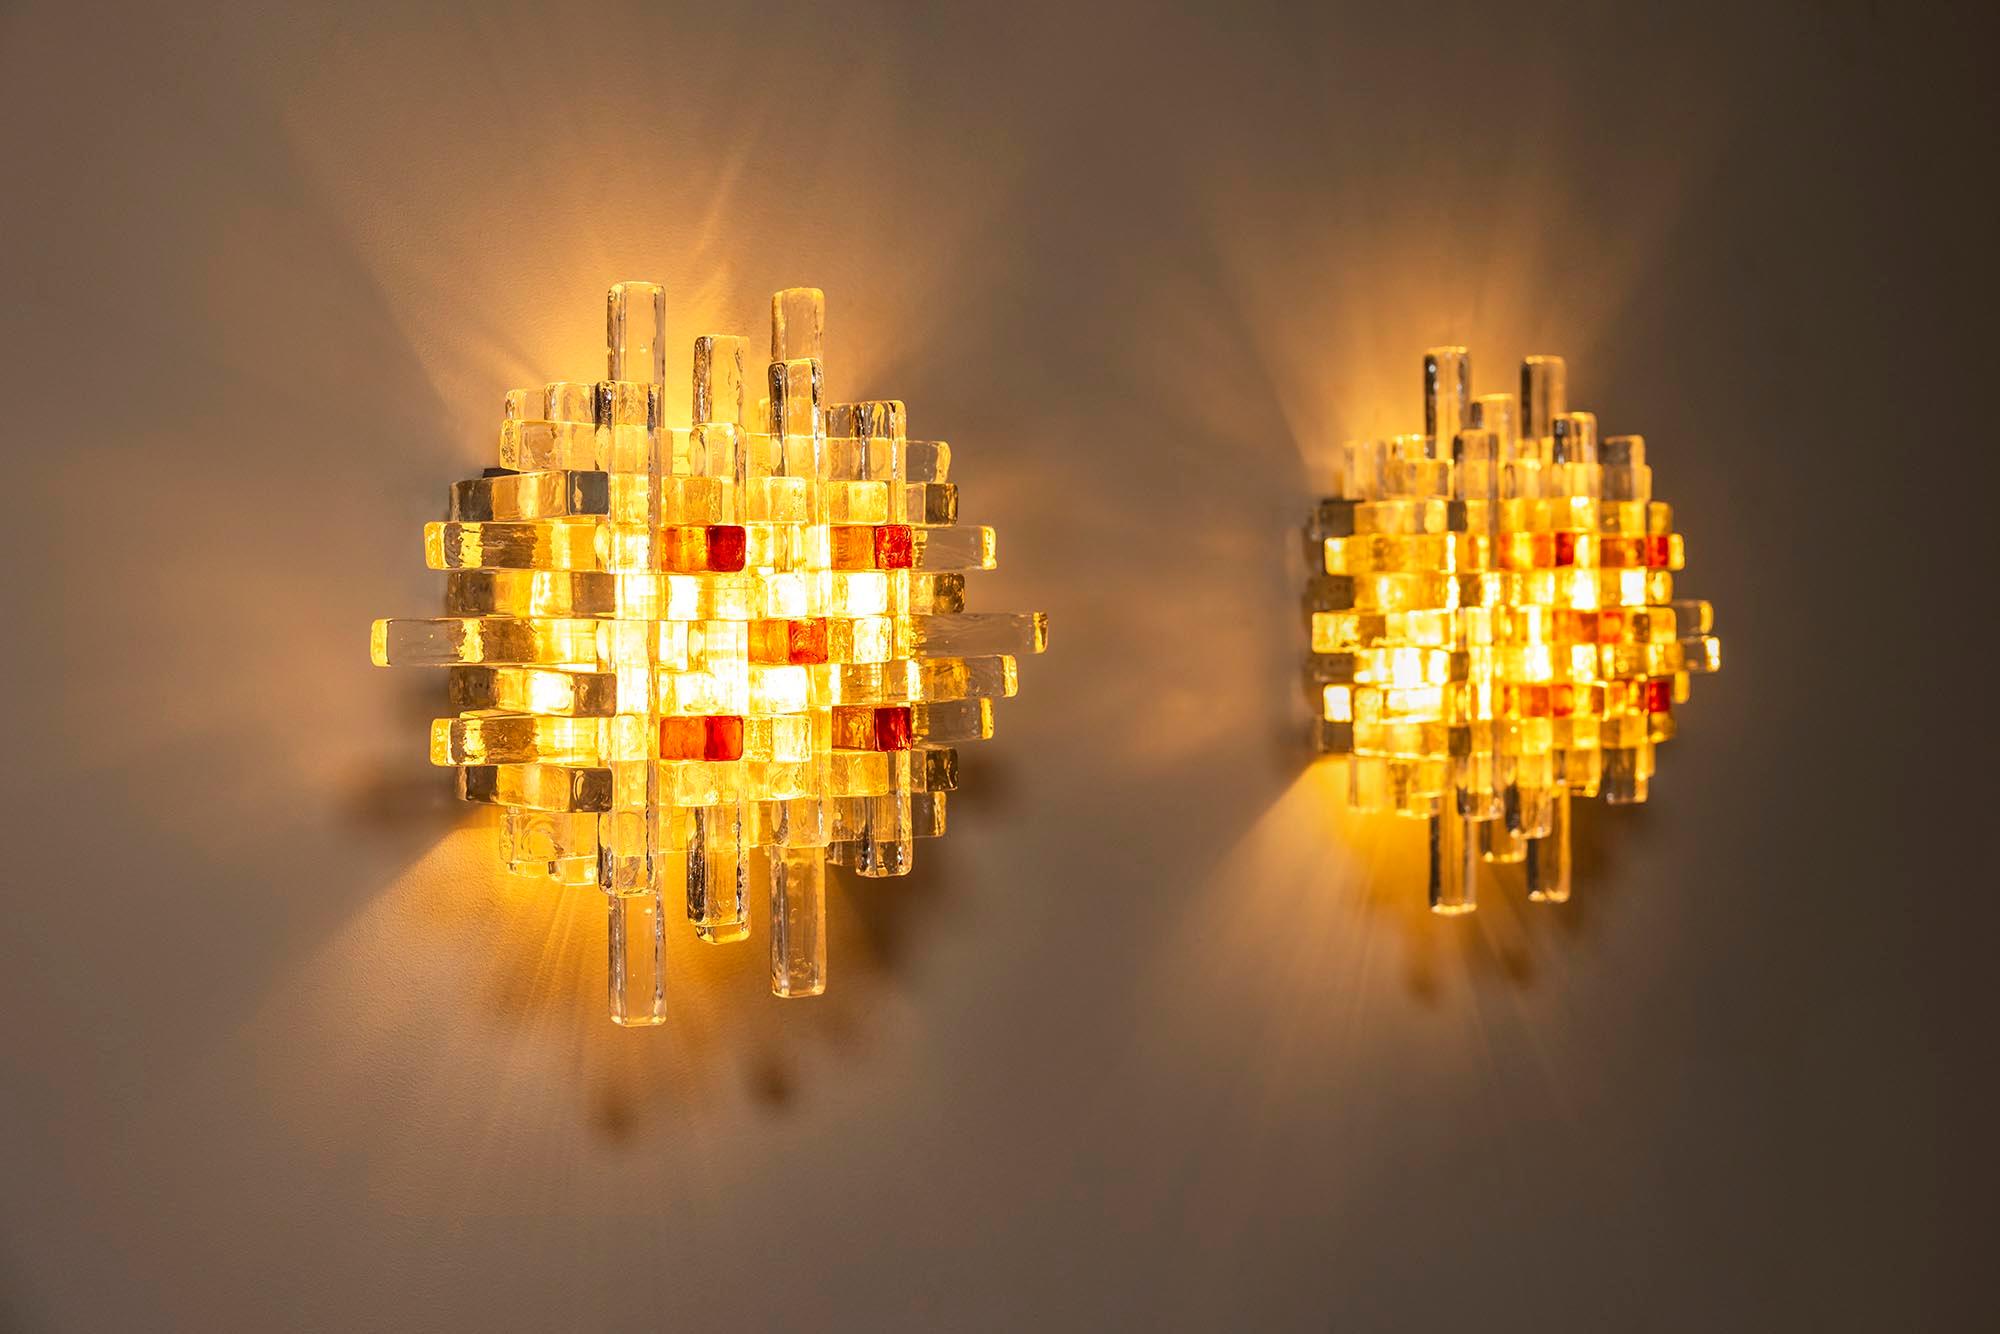 Murano Glass PoliArte Set of Wall Sconces in Murano by Albano Poli, Italy 1970s